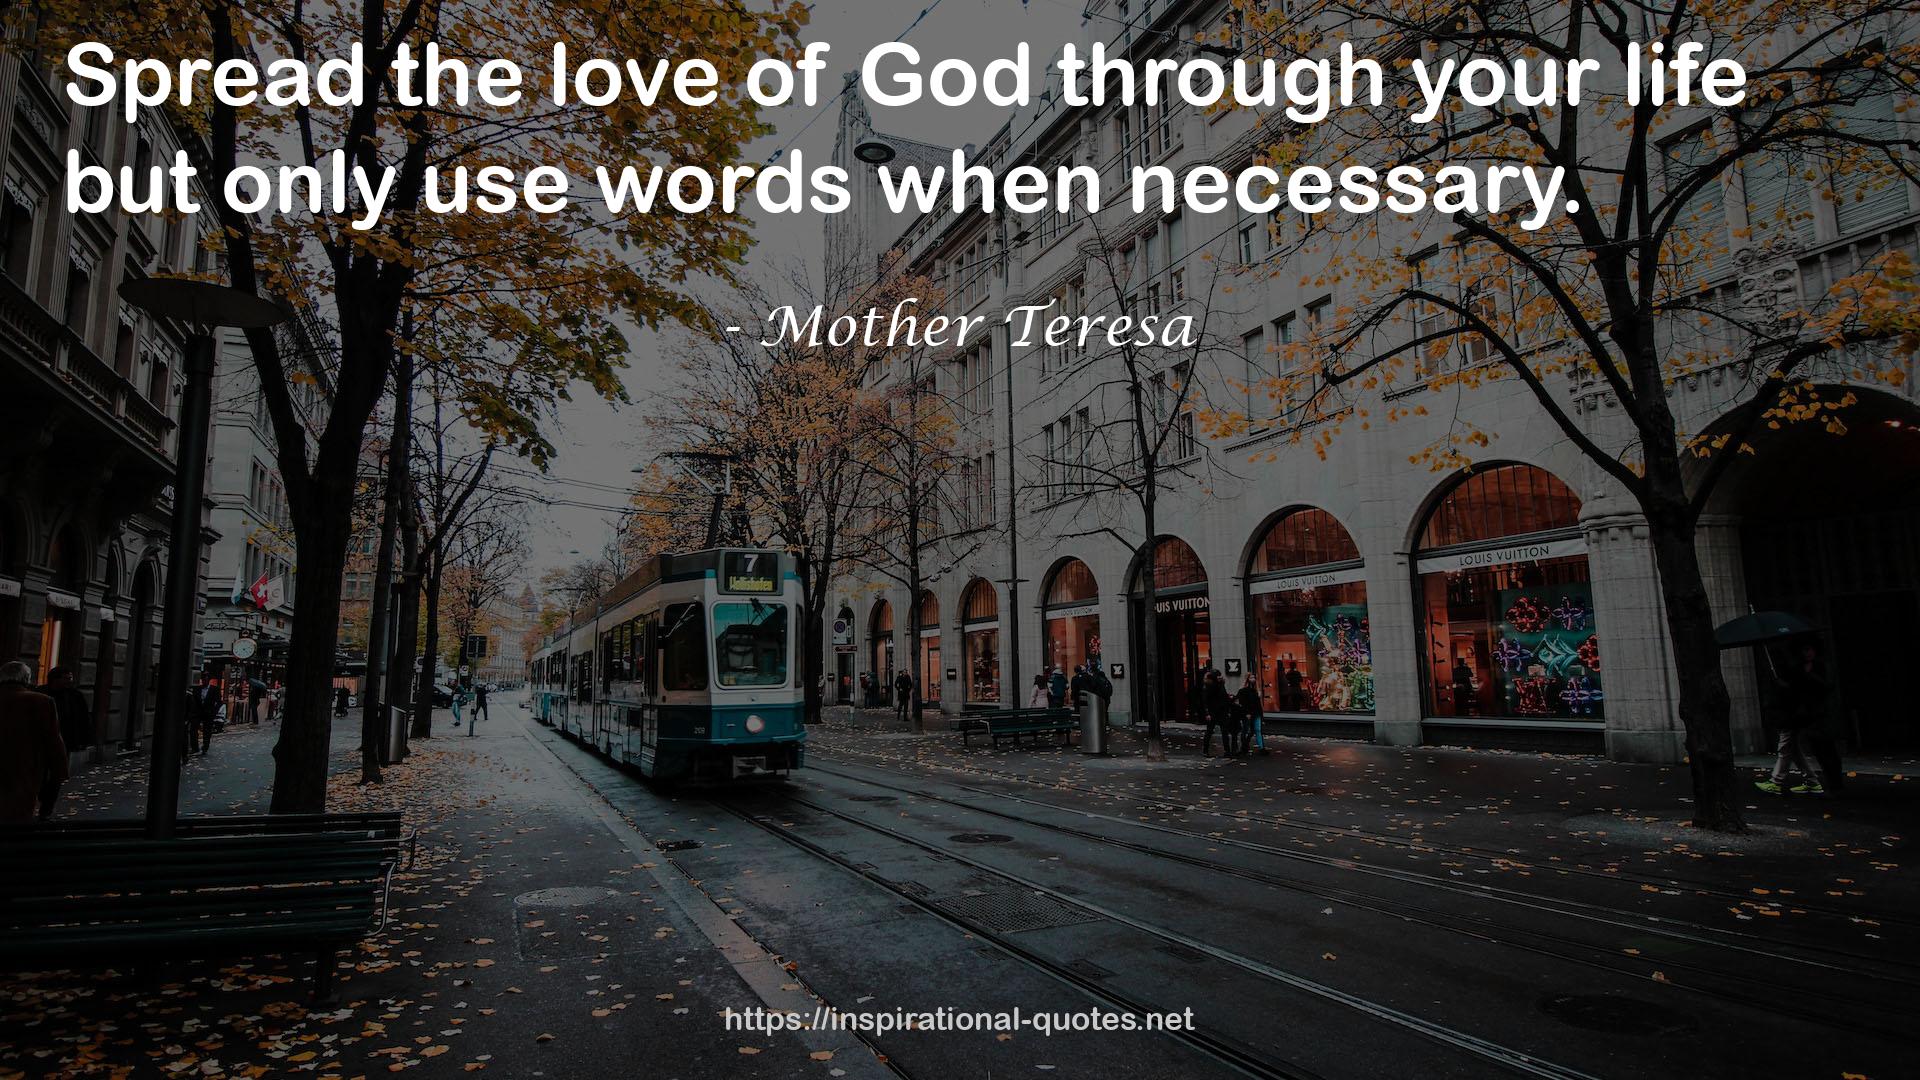 Mother Teresa QUOTES